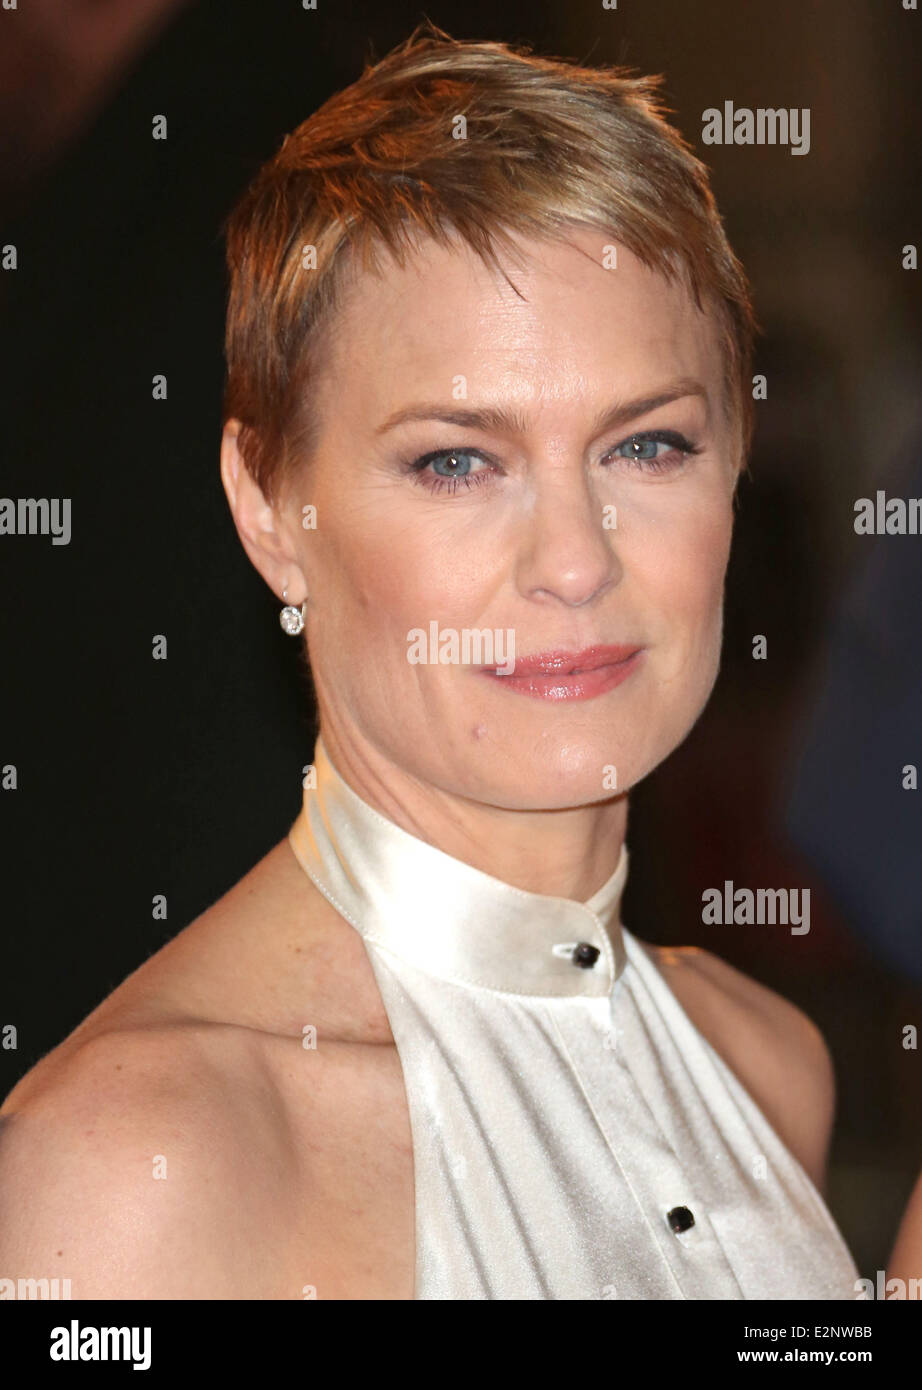 House of Cards' TV premiere held at Odeon Featuring: Robin Wright Where:  London, England When: 17 Jan 2013 Toby/WE Stock Photo - Alamy